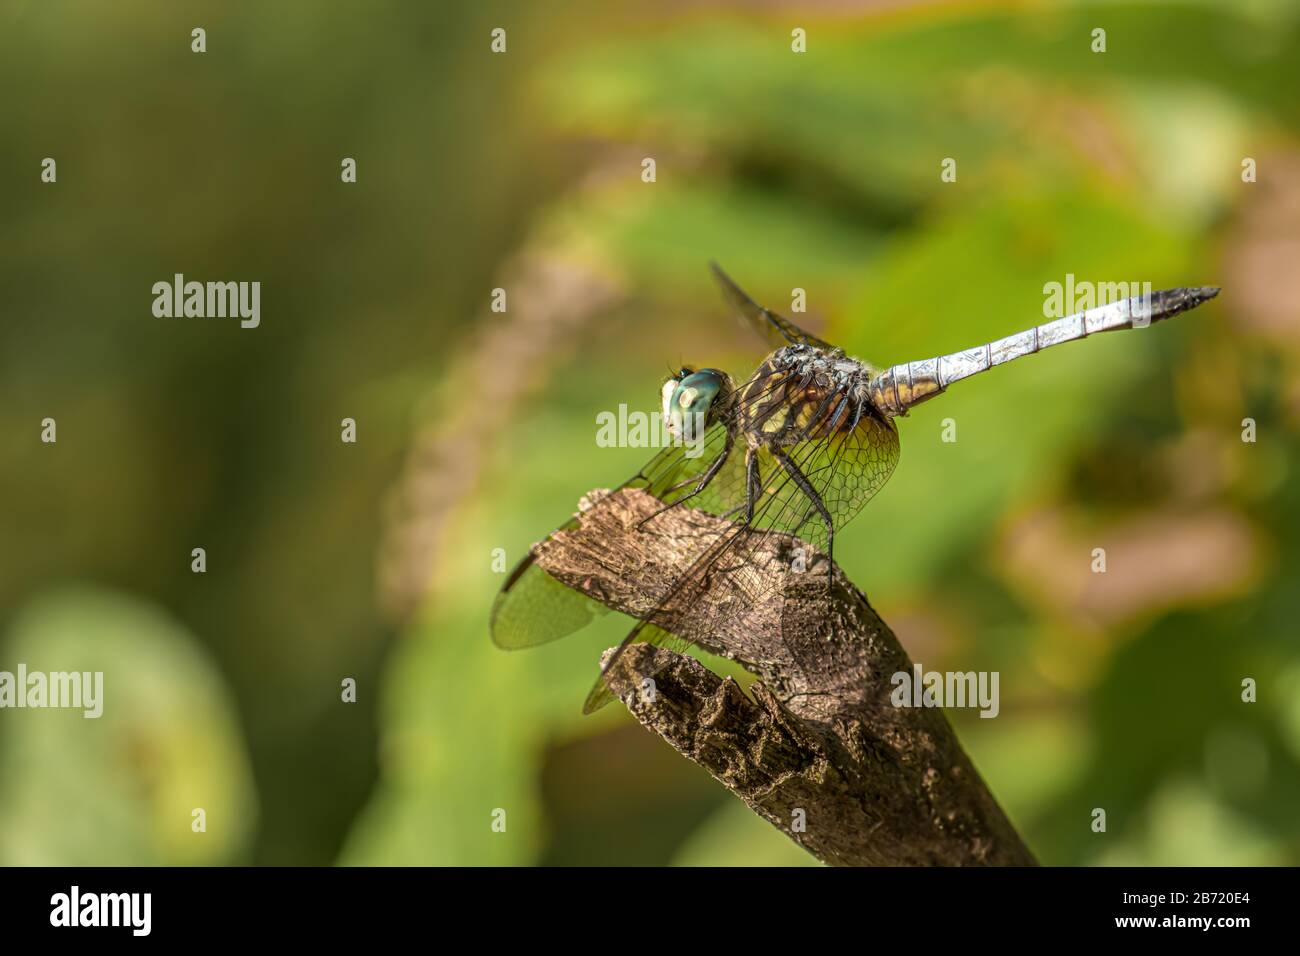 Closeup of single dragonfly with bulging eyes perched on a piece of old wood and a green blurred background. Stock Photo